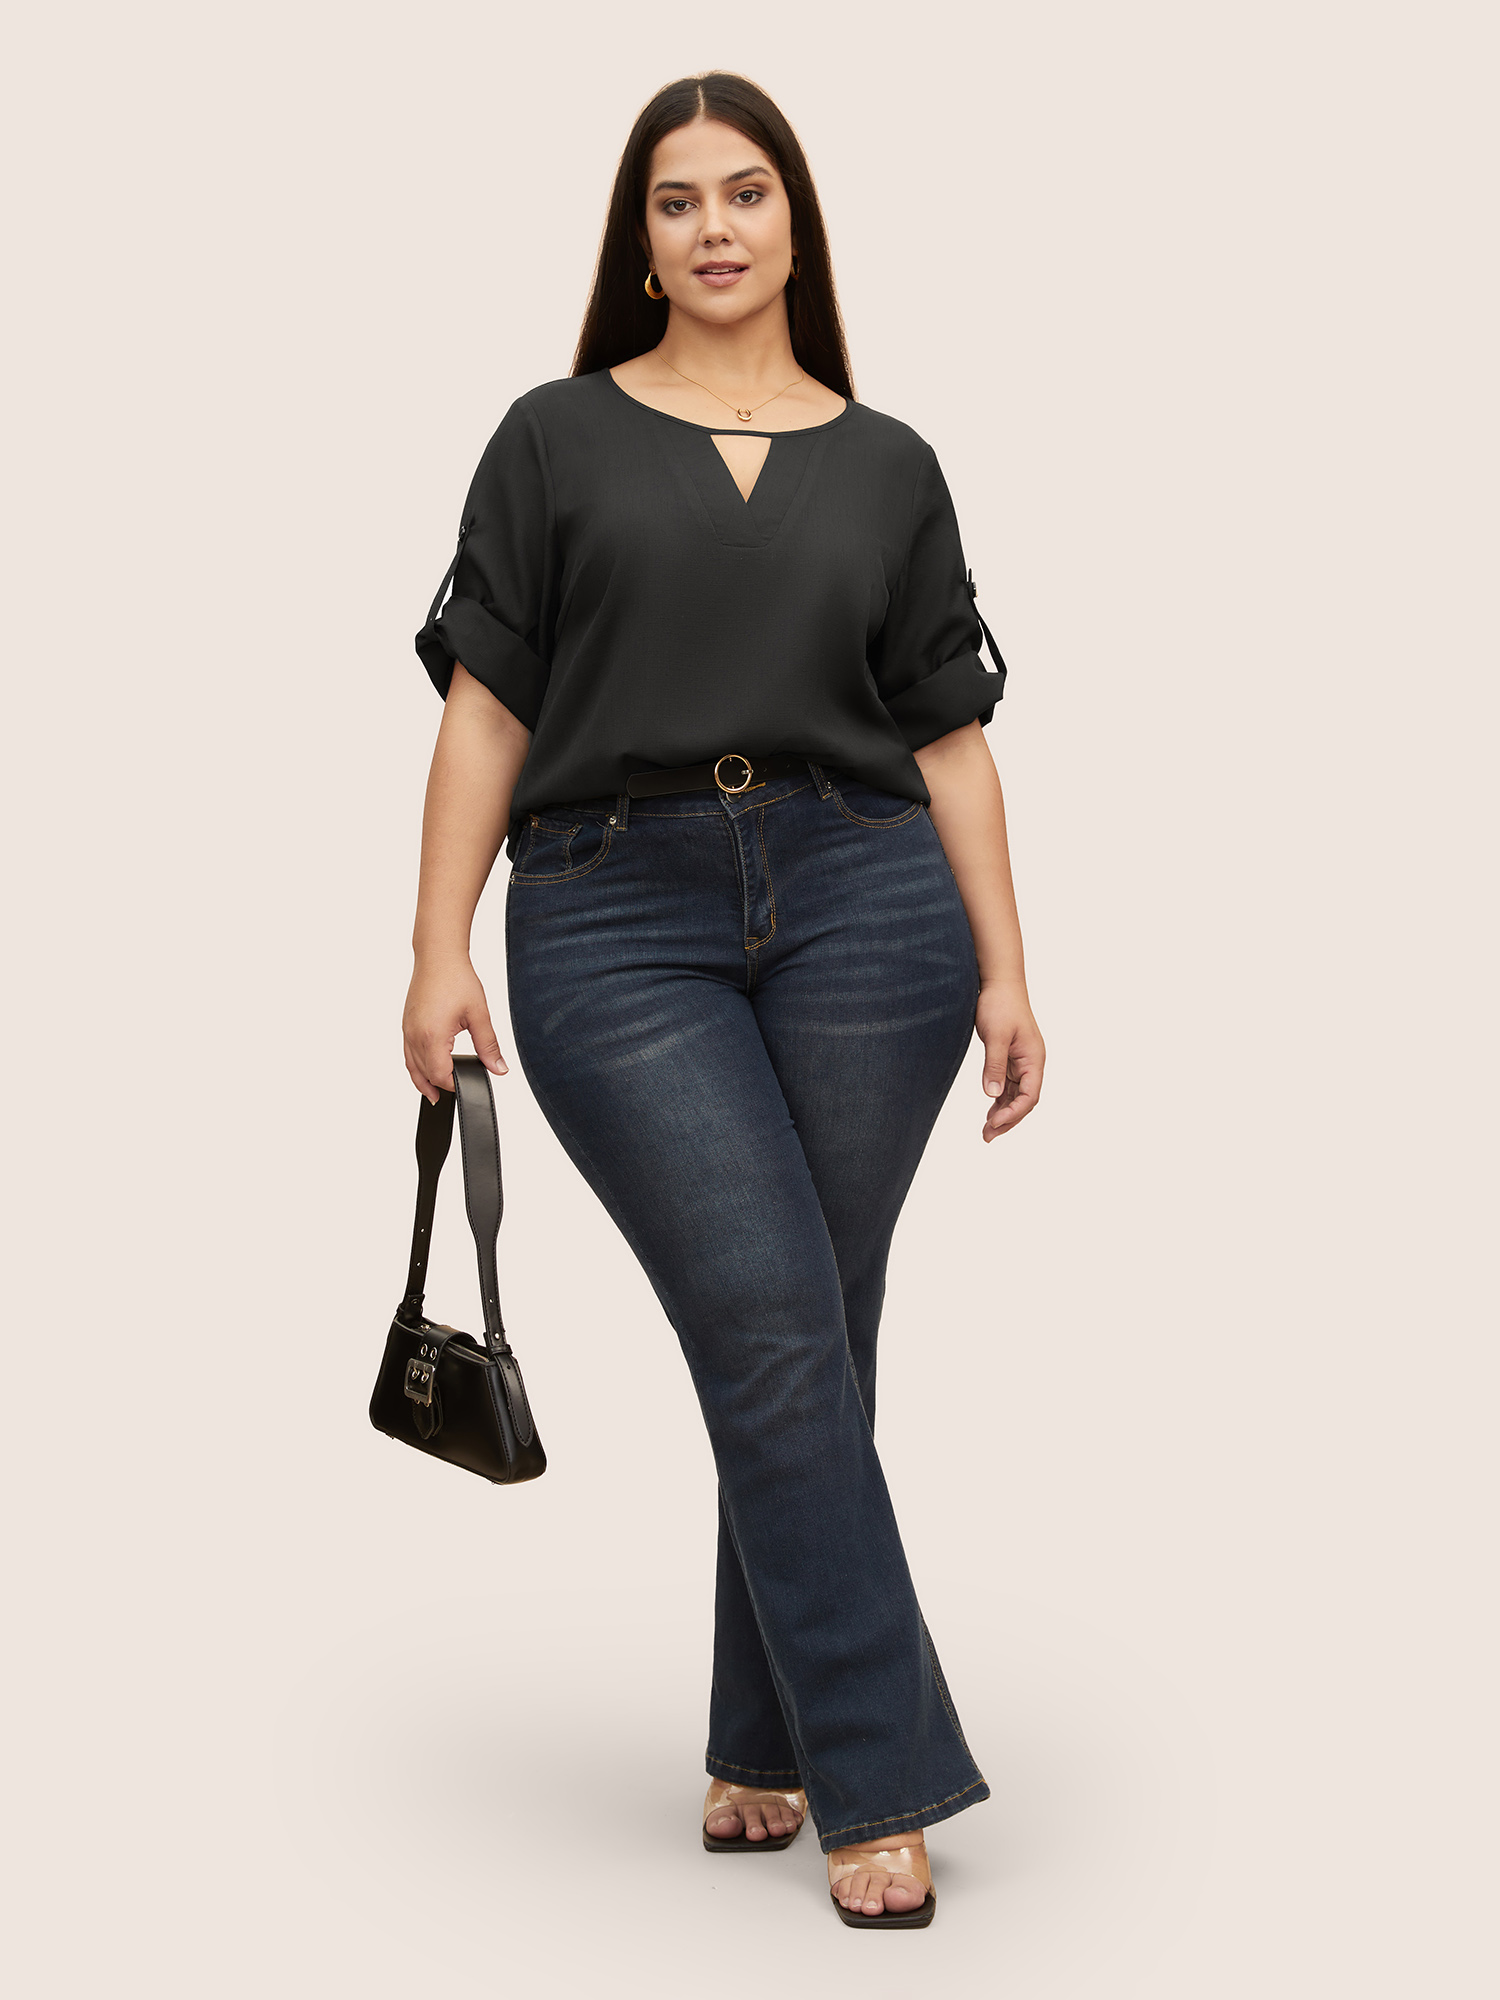 

Plus Size Black Plain Keyhole Tab Sleeve Blouse Women Work From Home Elbow-length sleeve Notched collar Work Blouses BloomChic